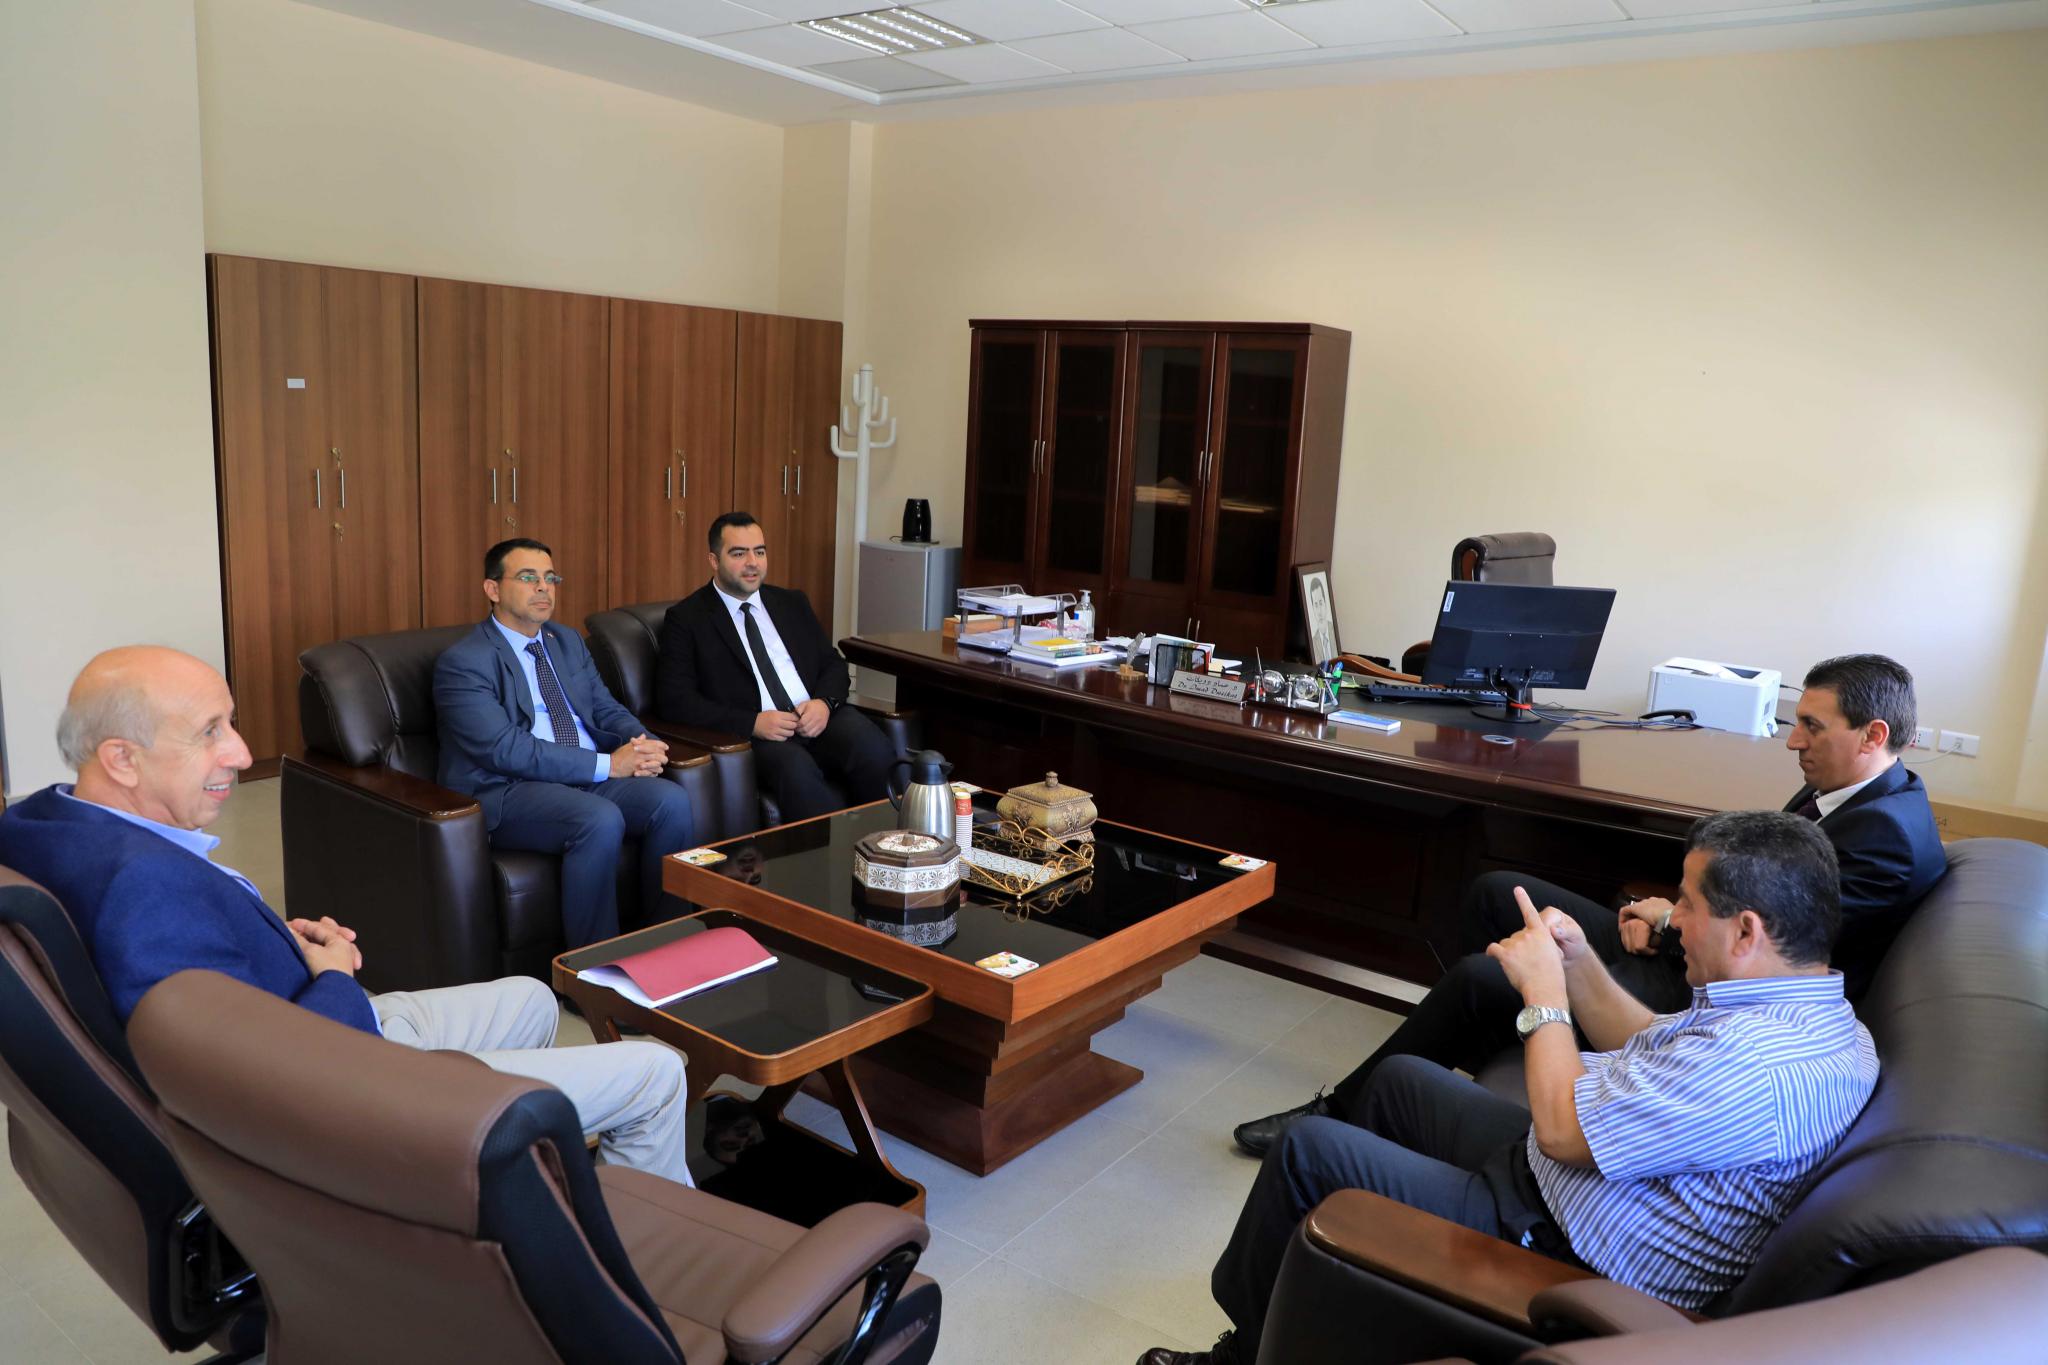 Part of the visit of the Turkish Cultural Attaché